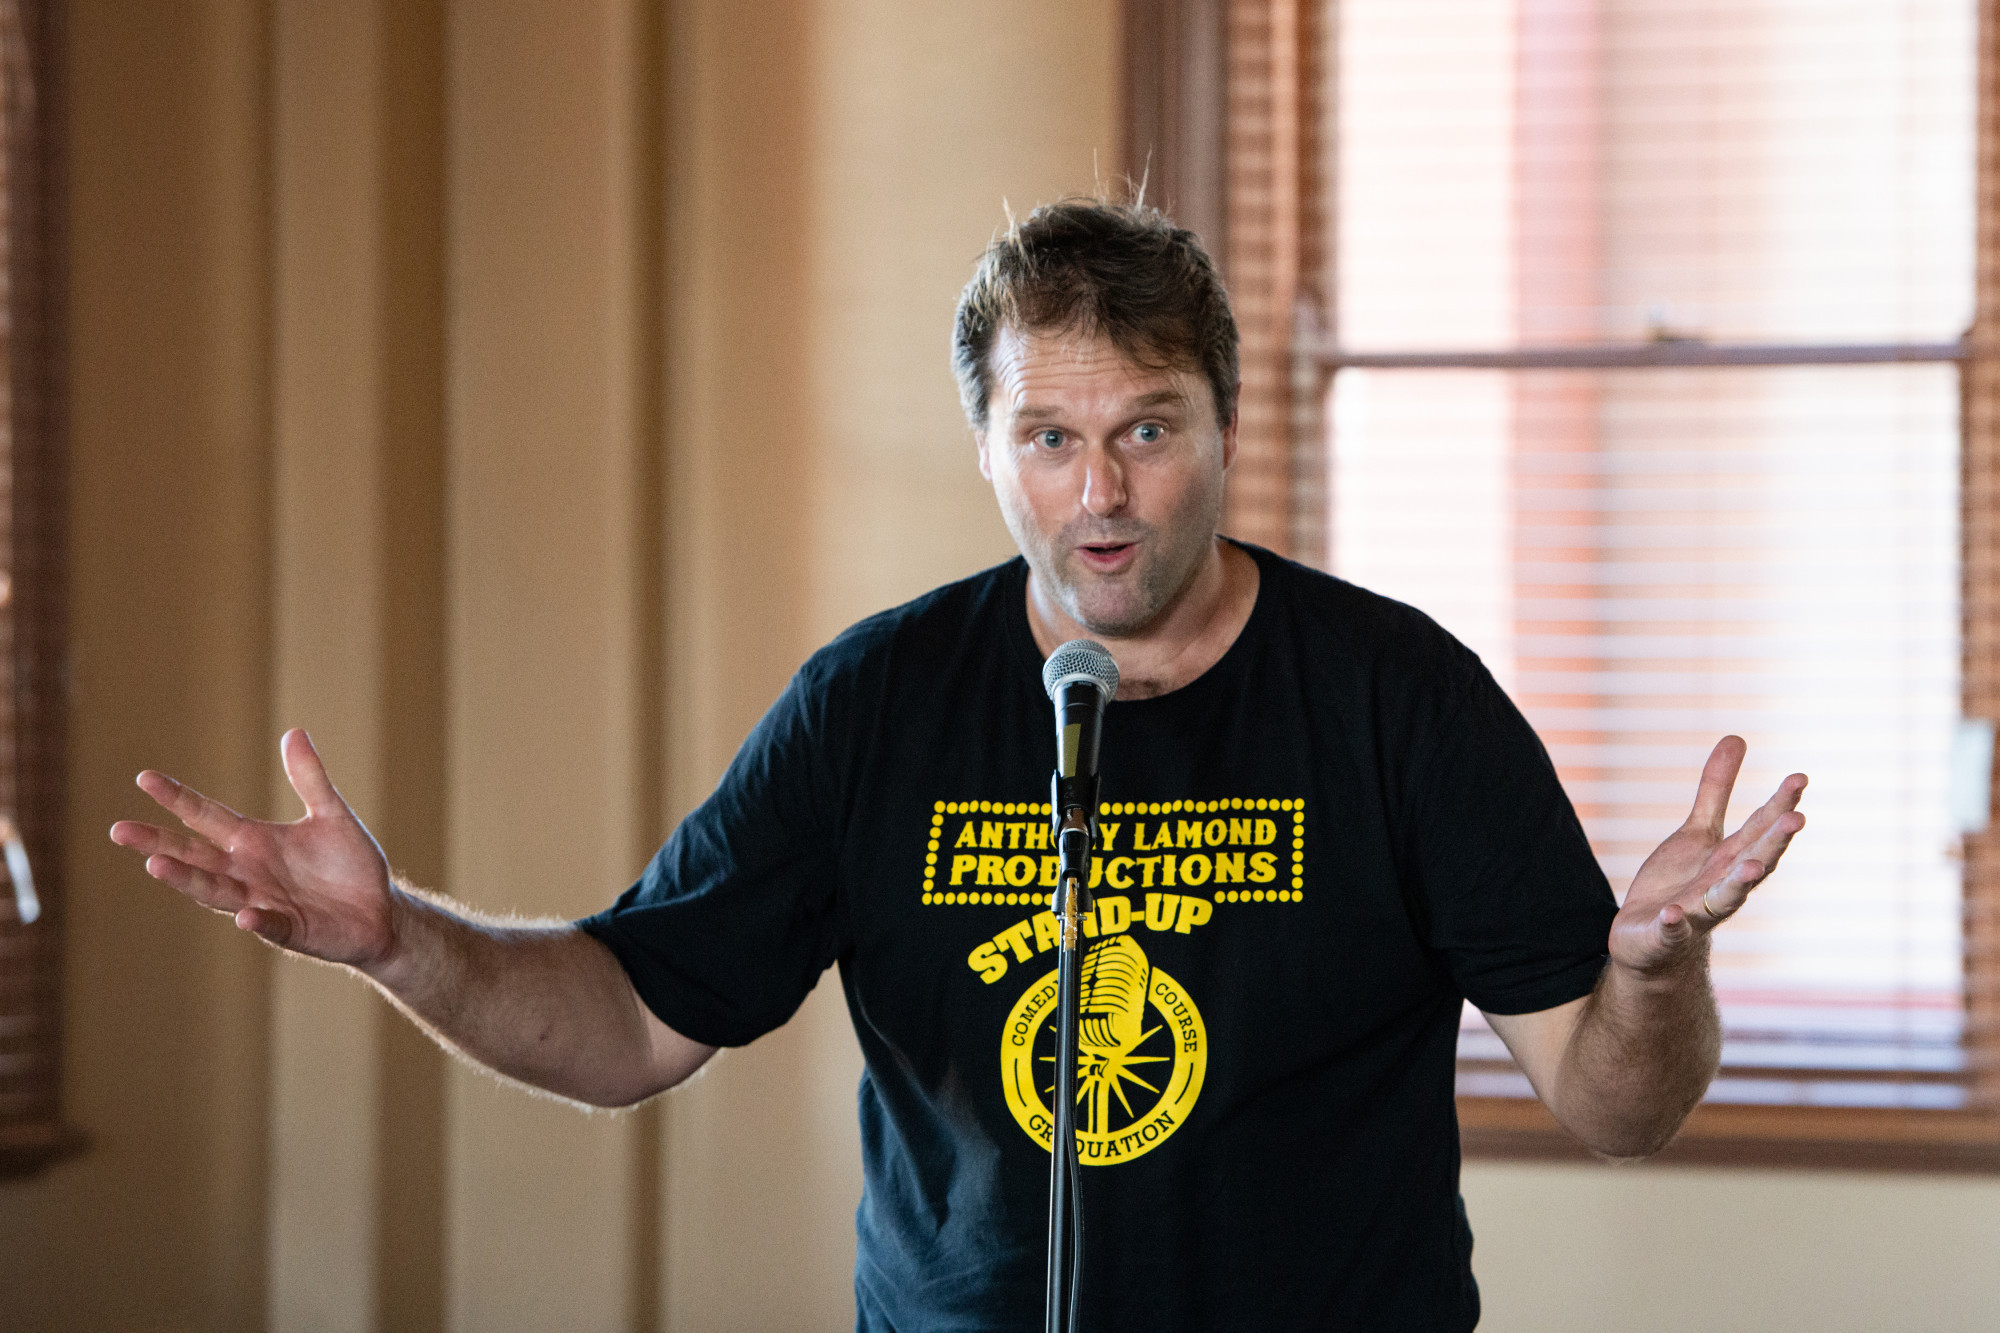 Stand-up comedian Anthony Lamond is hosting a stand-up comedy workshop on Saturday, April 10 that will see locals learn how to perform a routine then present it later that night.